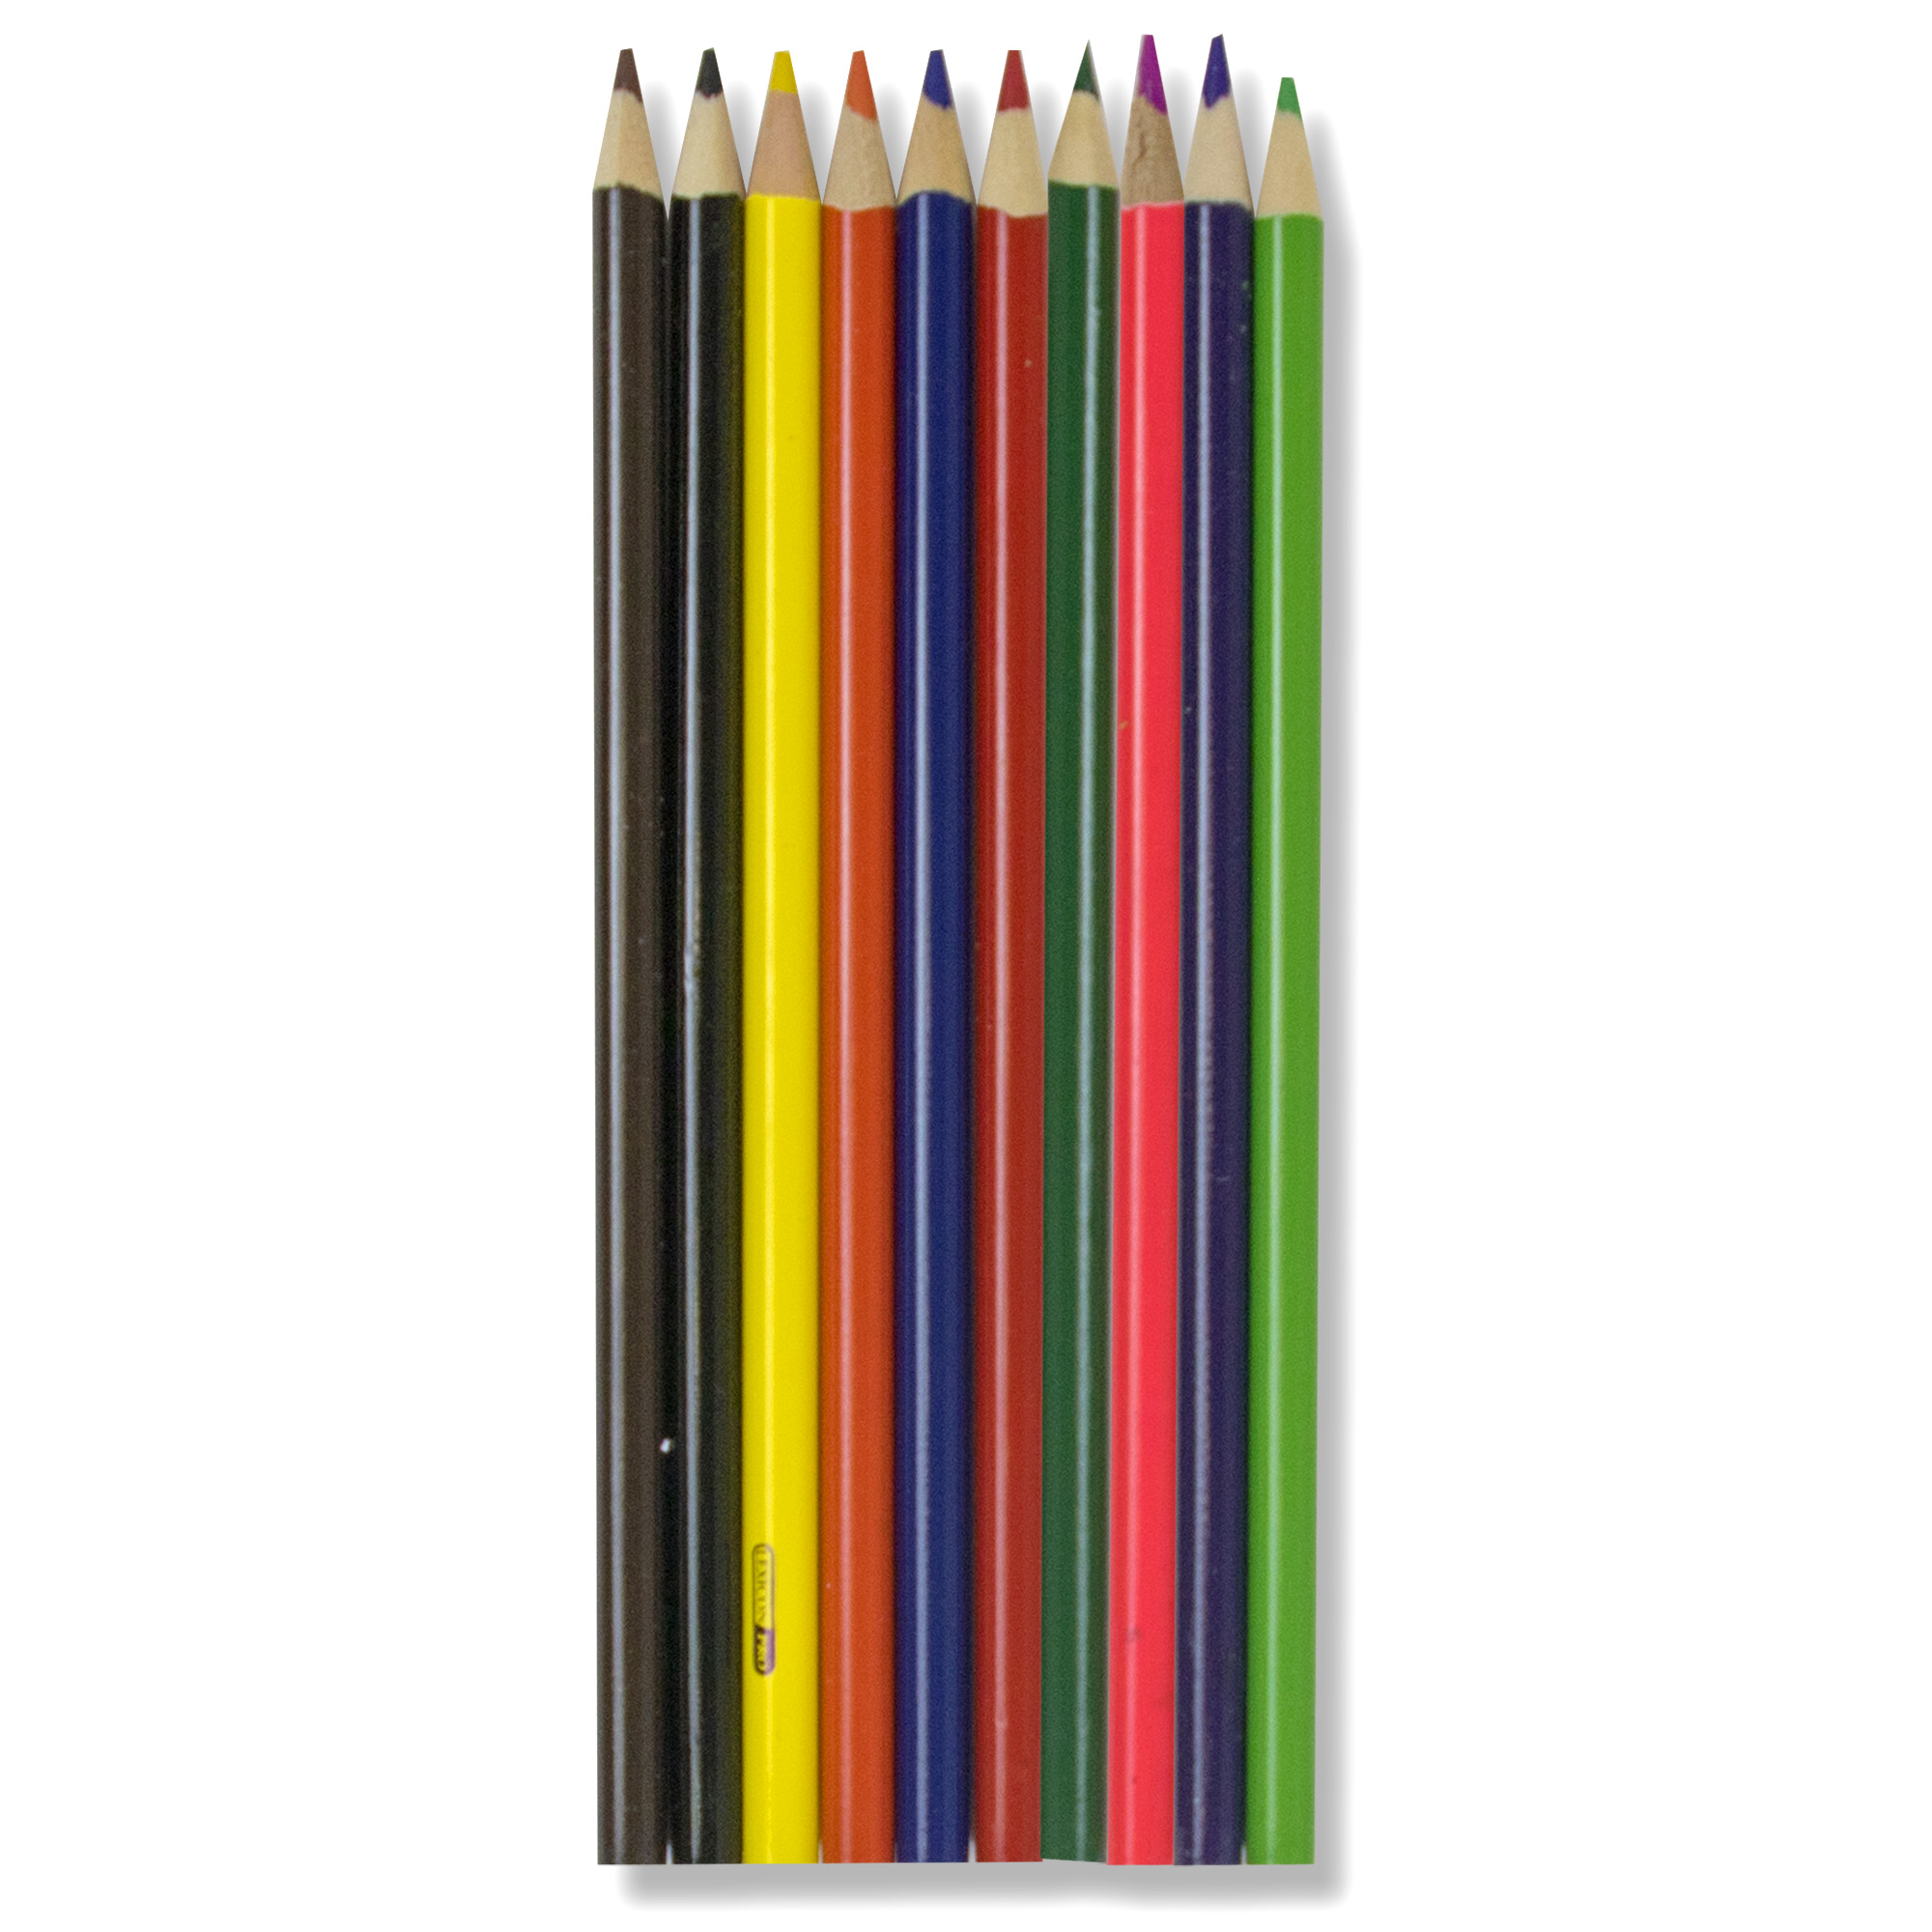 Wholesale 10 Pack Of Colored Pencils | Bags In Bulk